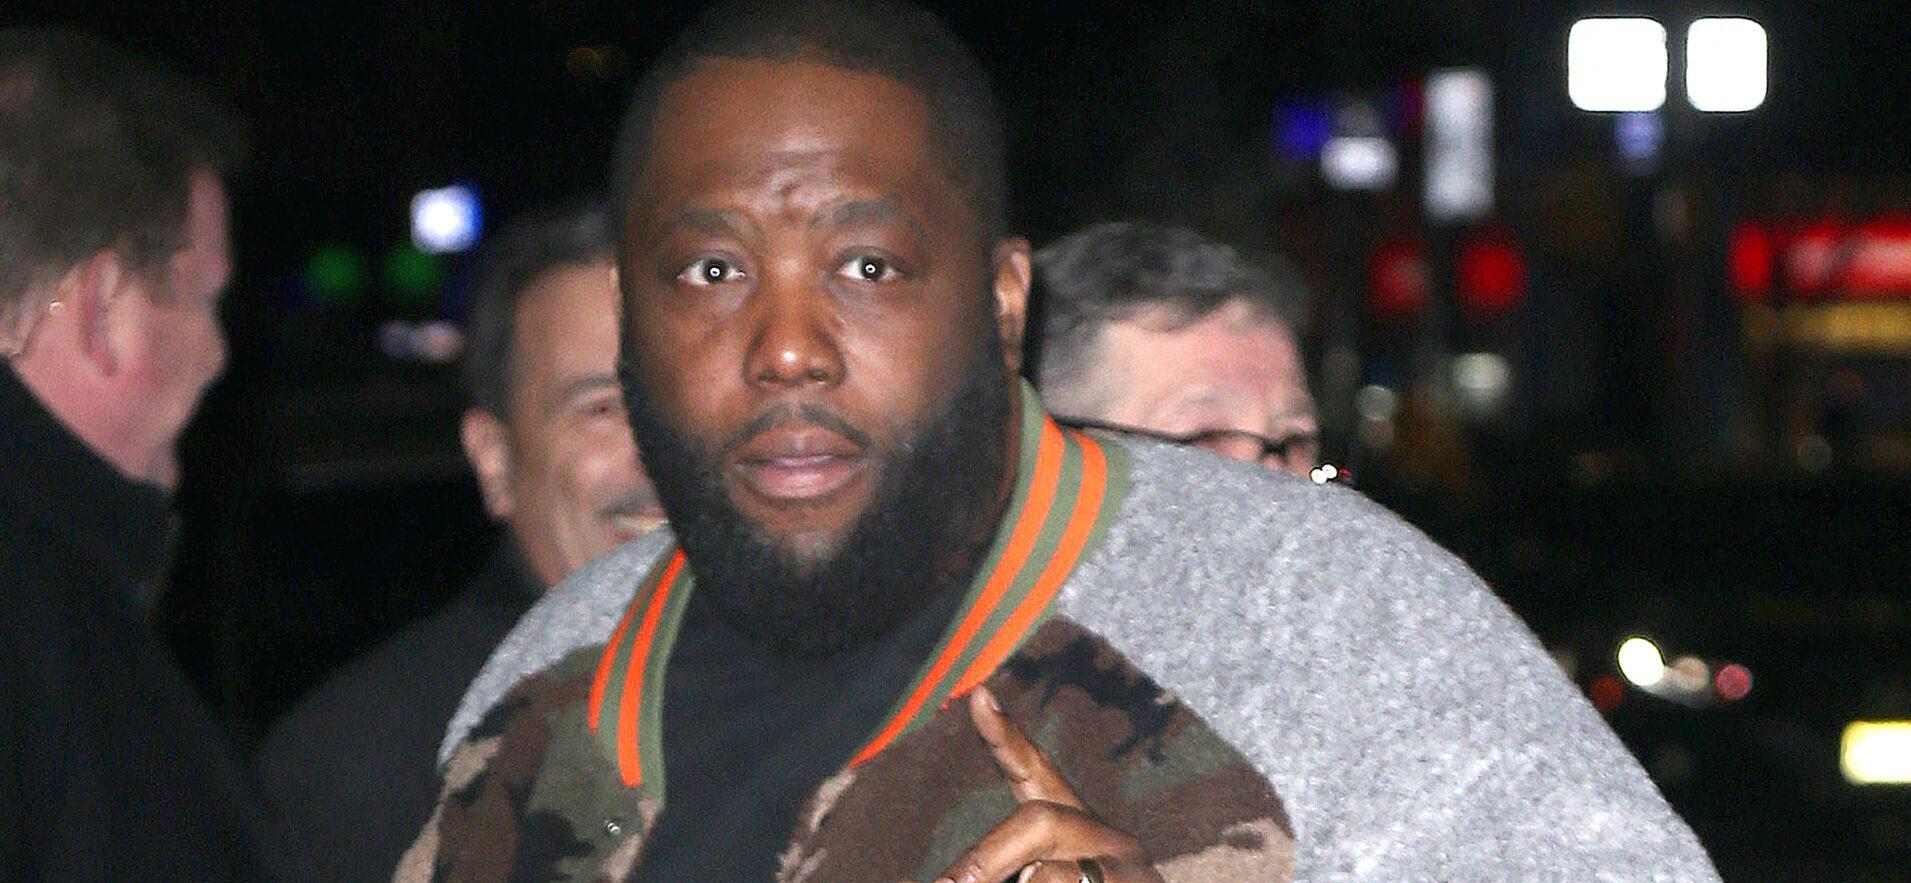 Rapper Killer Mike visits The Late Show with Stephen Colbert in New York